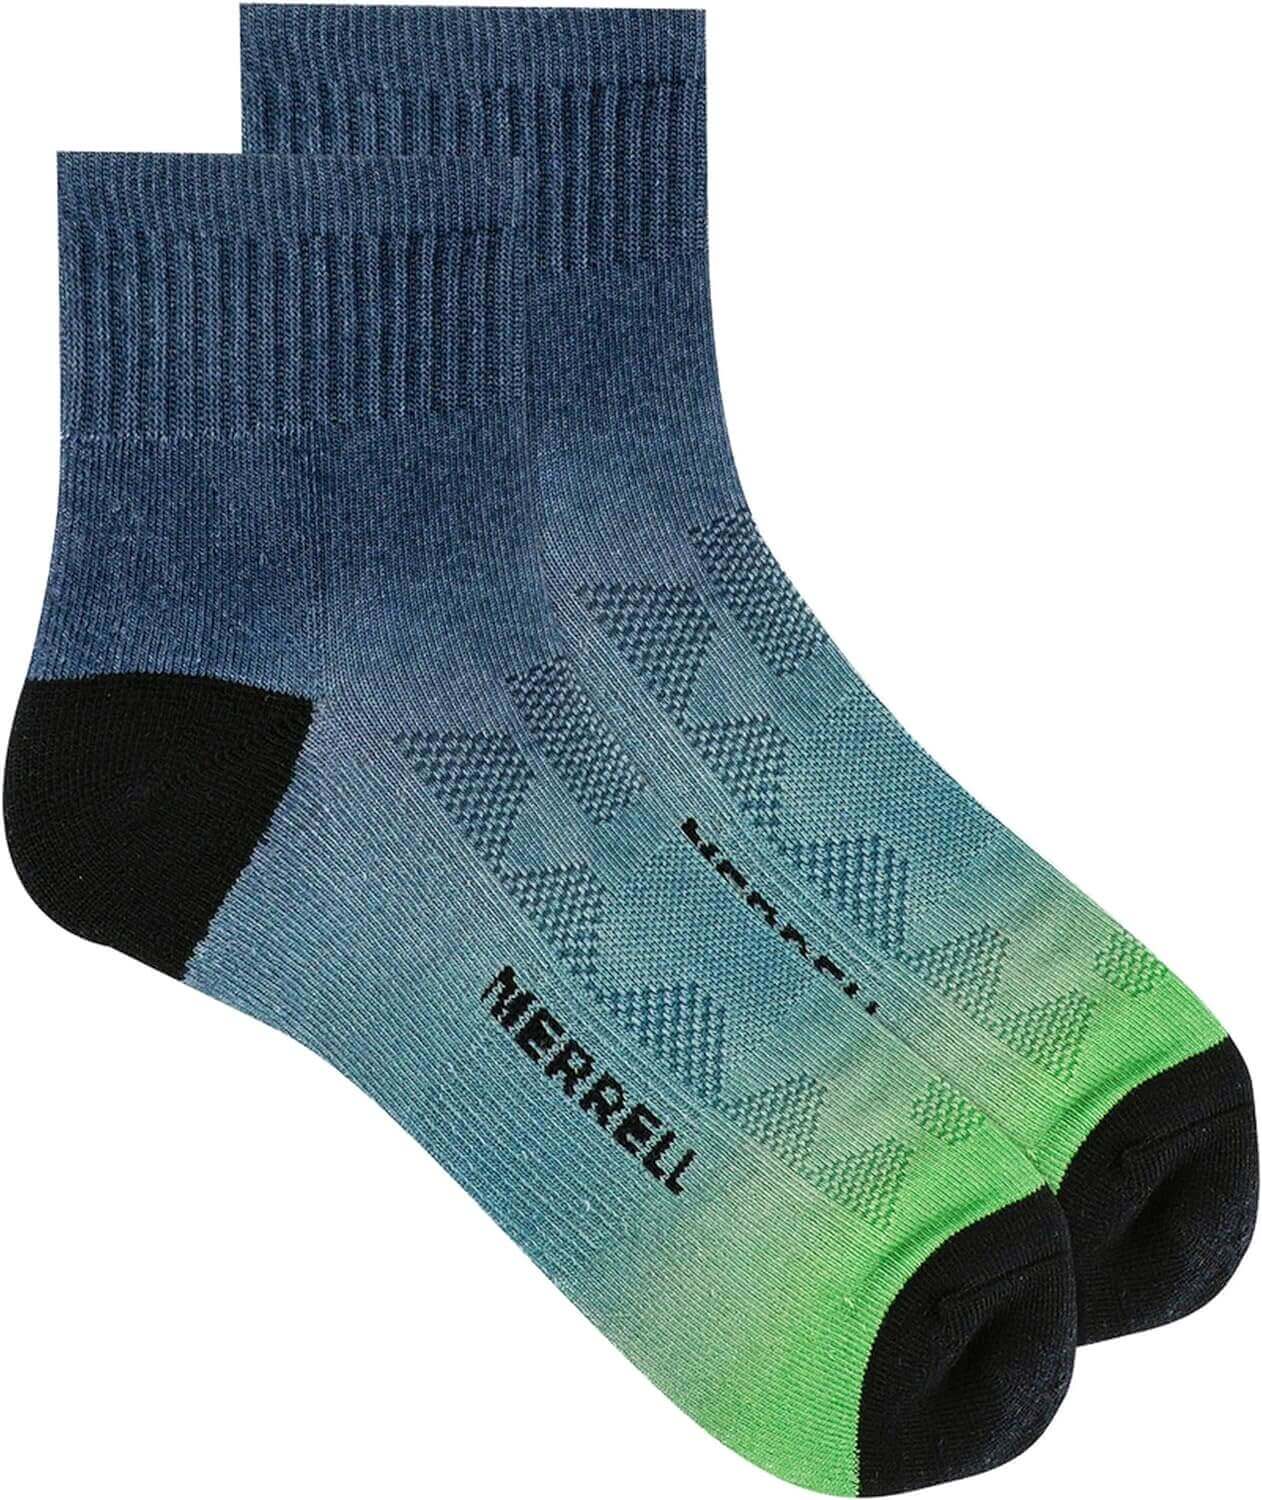 Shop The Latest >Merrell Men's and Women's Moab Hiking Mid Cushion Socks > *Only $16.45*> From The Top Brand > *Merrelll* > Shop Now and Get Free Shipping On Orders Over $45.00 >*Shop Earth Foot*